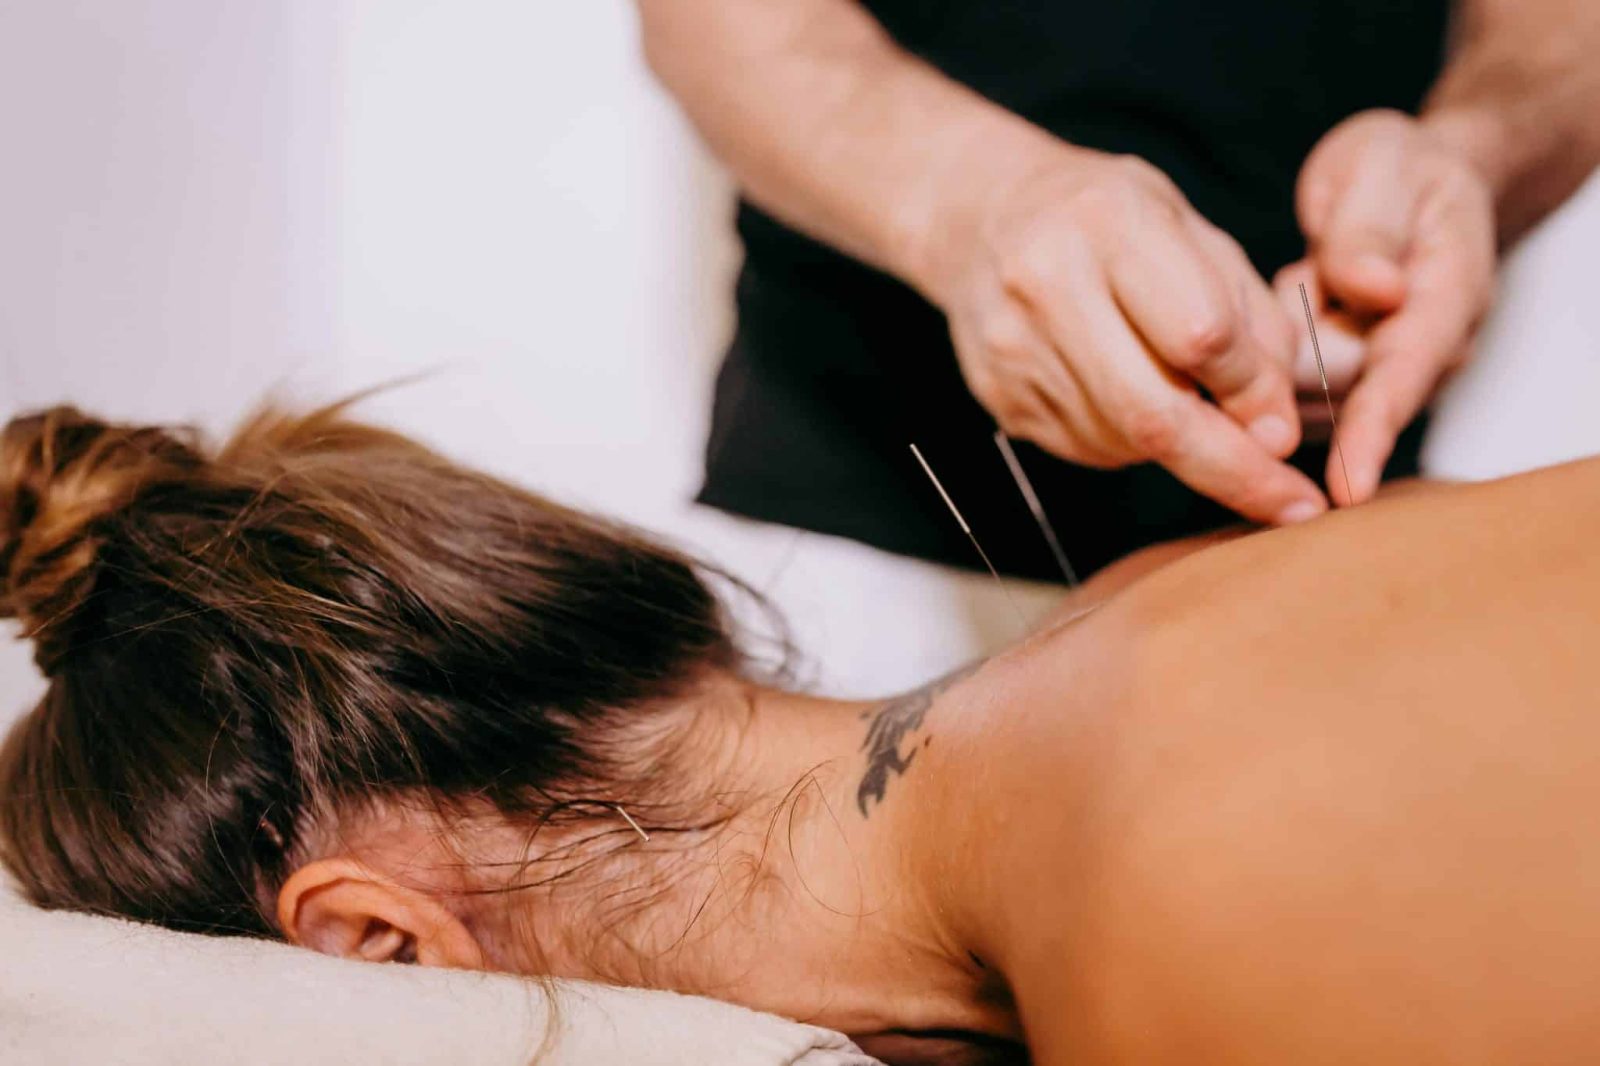 woman receiving acupuncture on her back